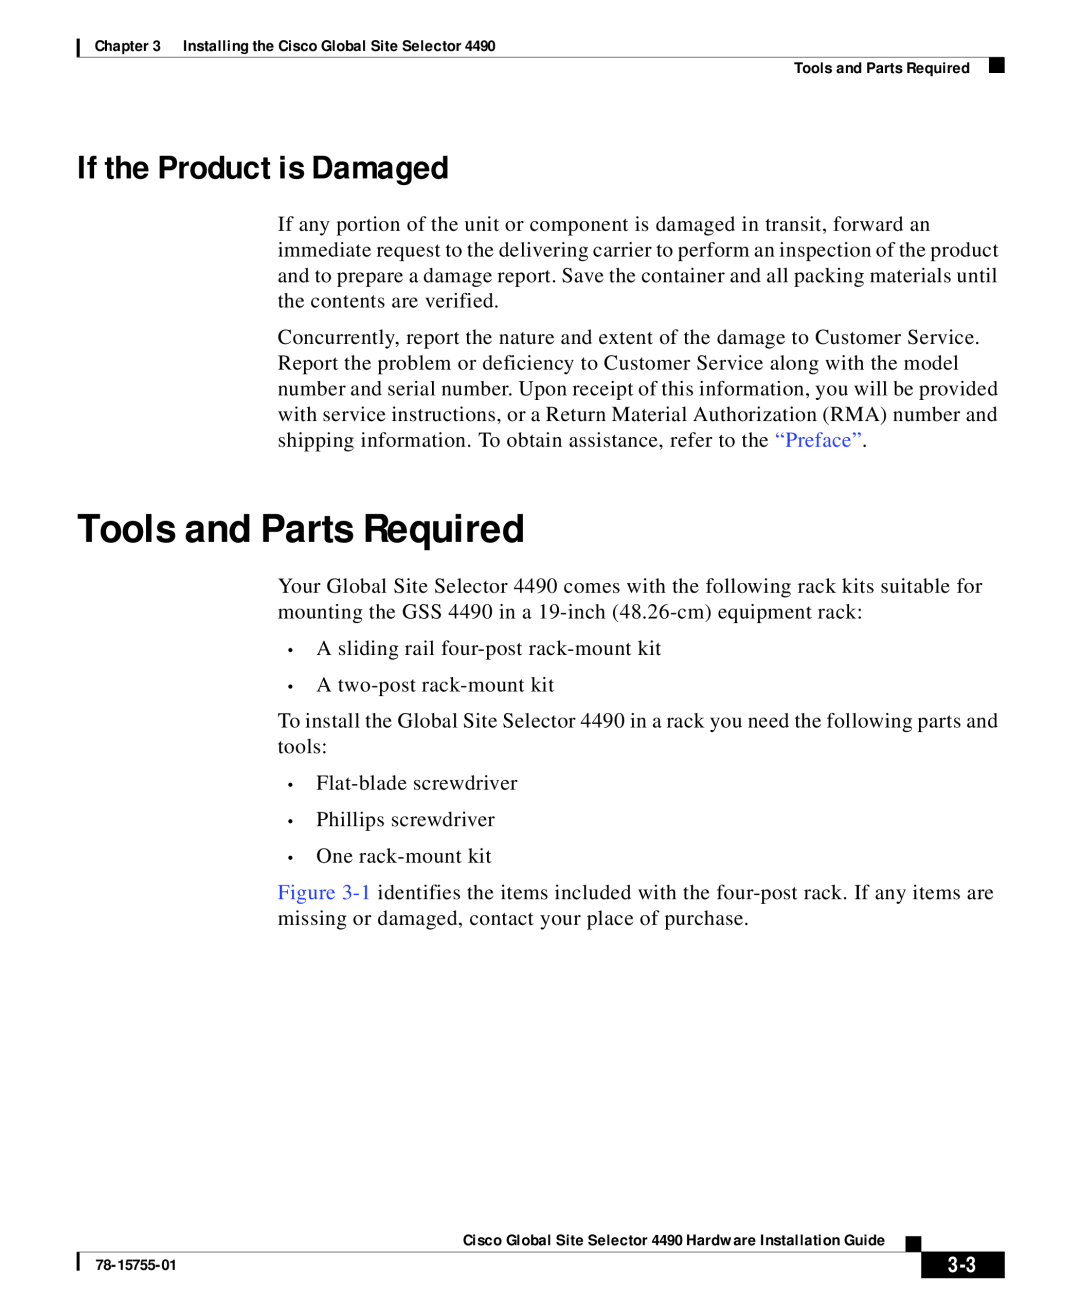 Cisco Systems 4490 appendix Tools and Parts Required, If the Product is Damaged 